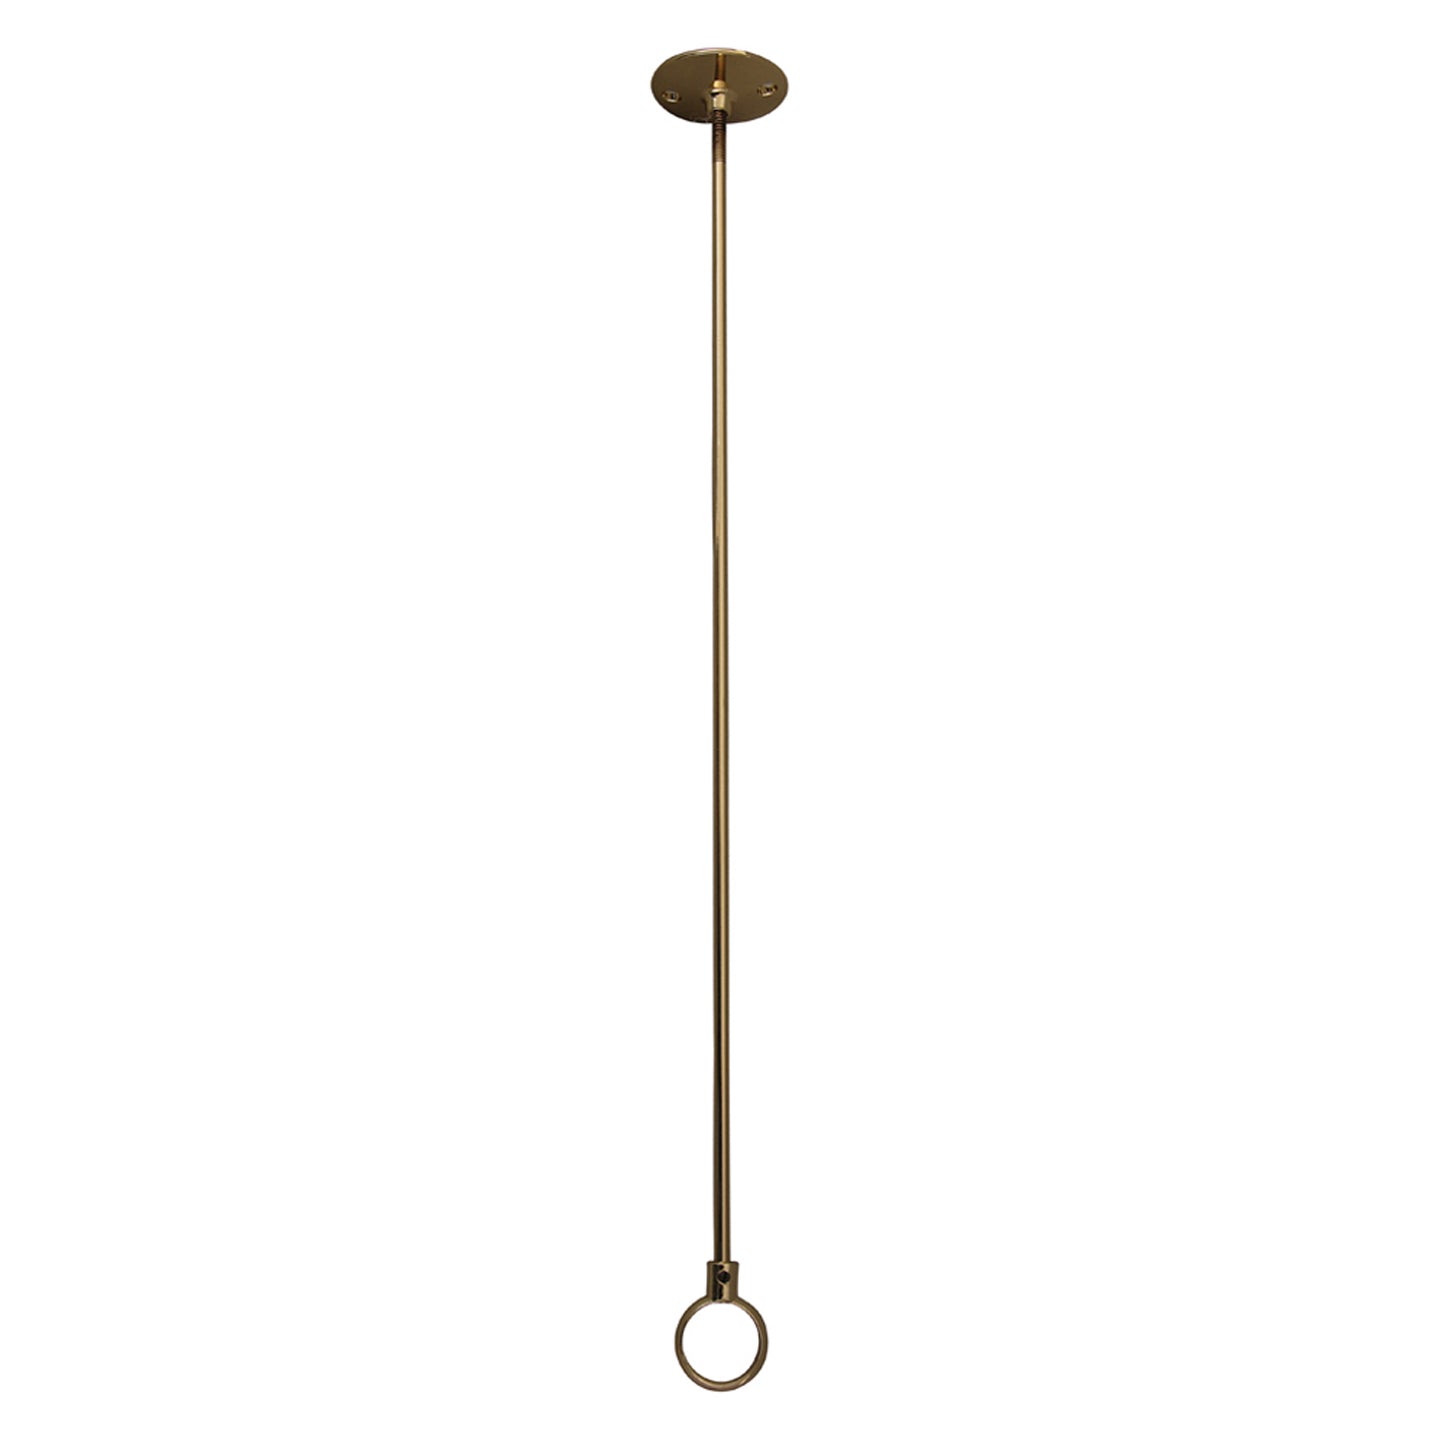 Ceiling Support 28" with Flange and Eyeloop Polished Brass